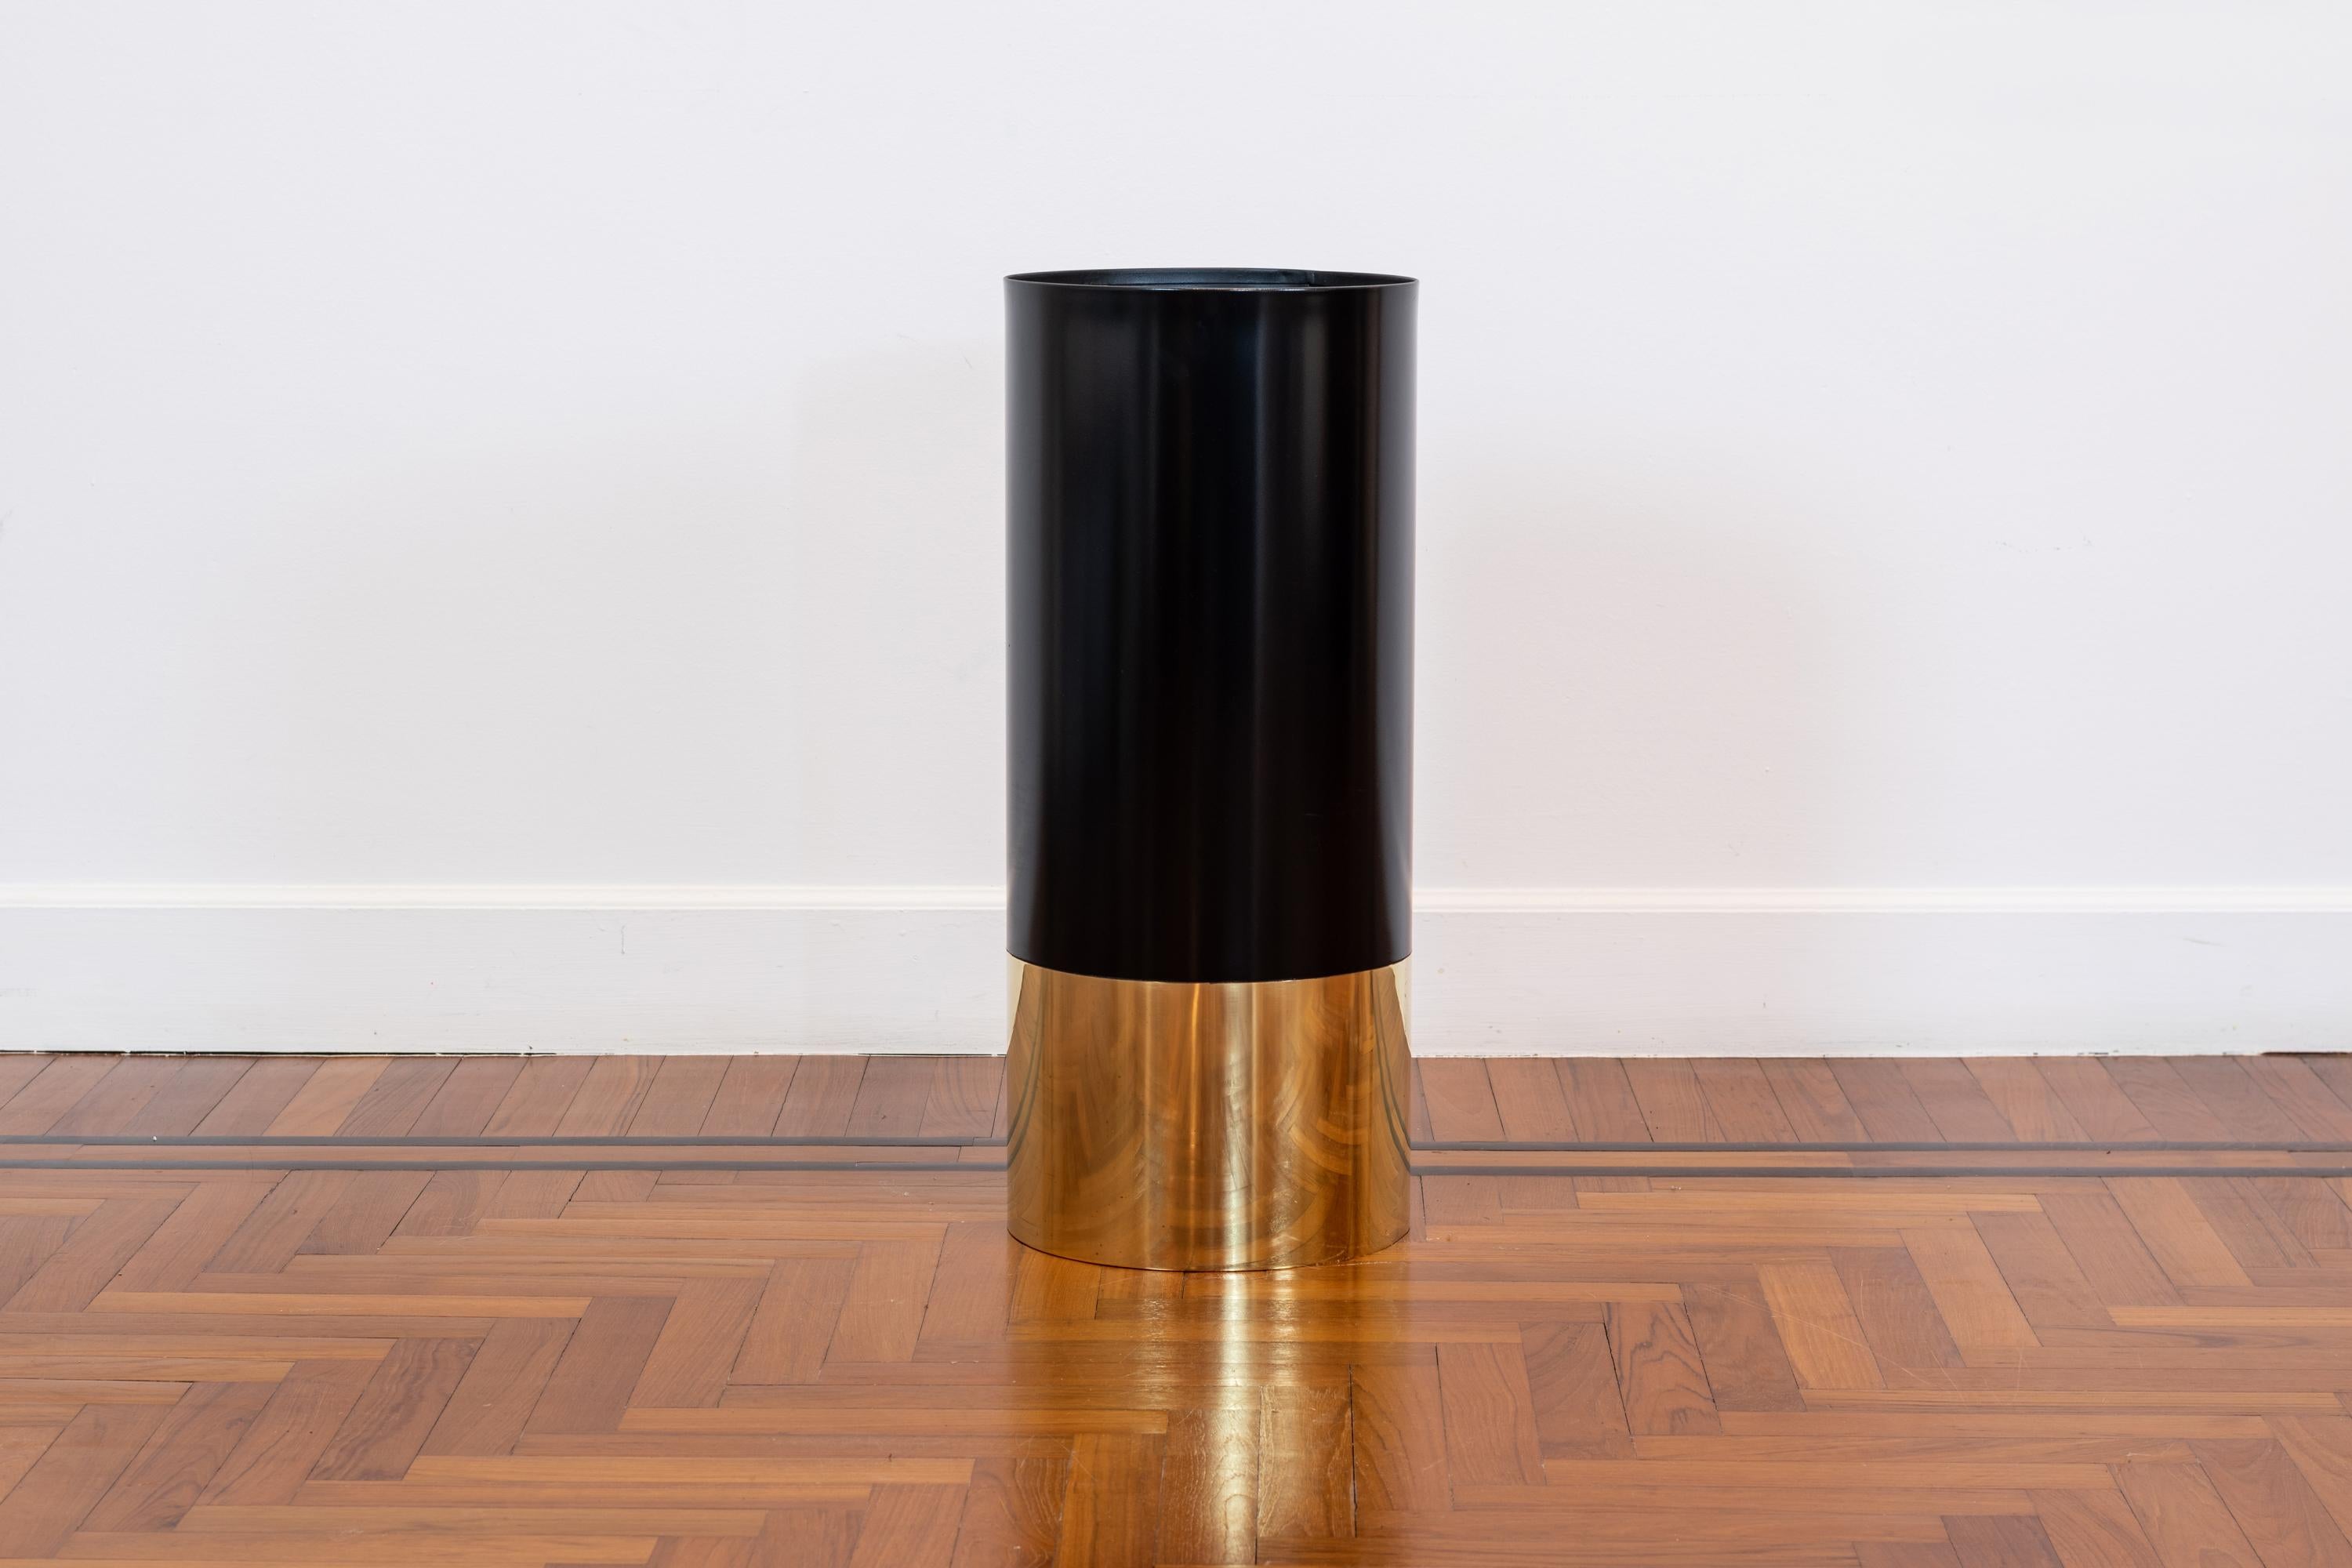 Umbrella stand model 0G13 also known as Cartuccia with a structure in black enameled sheet metal and brass. It was designed by Luigi Caccia Dominioni for Azucena 1955ca, Italy.

Luigi Caccia Dominioni was an Italian designer and architect born in